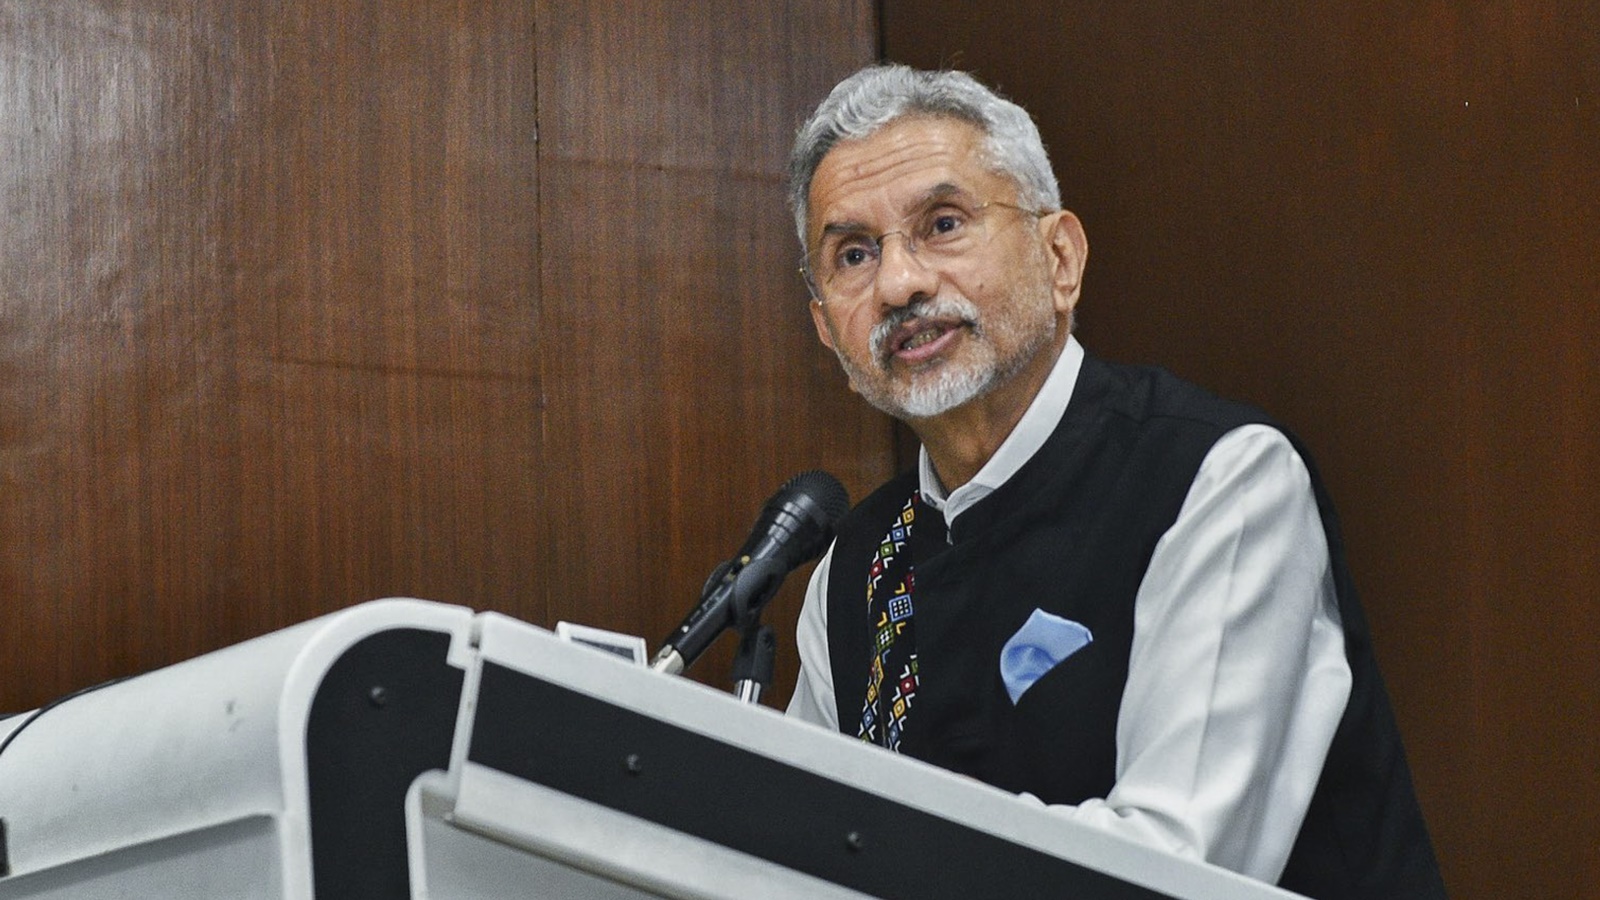 android, nepal took ‘unilateral’ measures, does not change ground reality: jaishankar on new notes showing indian territories